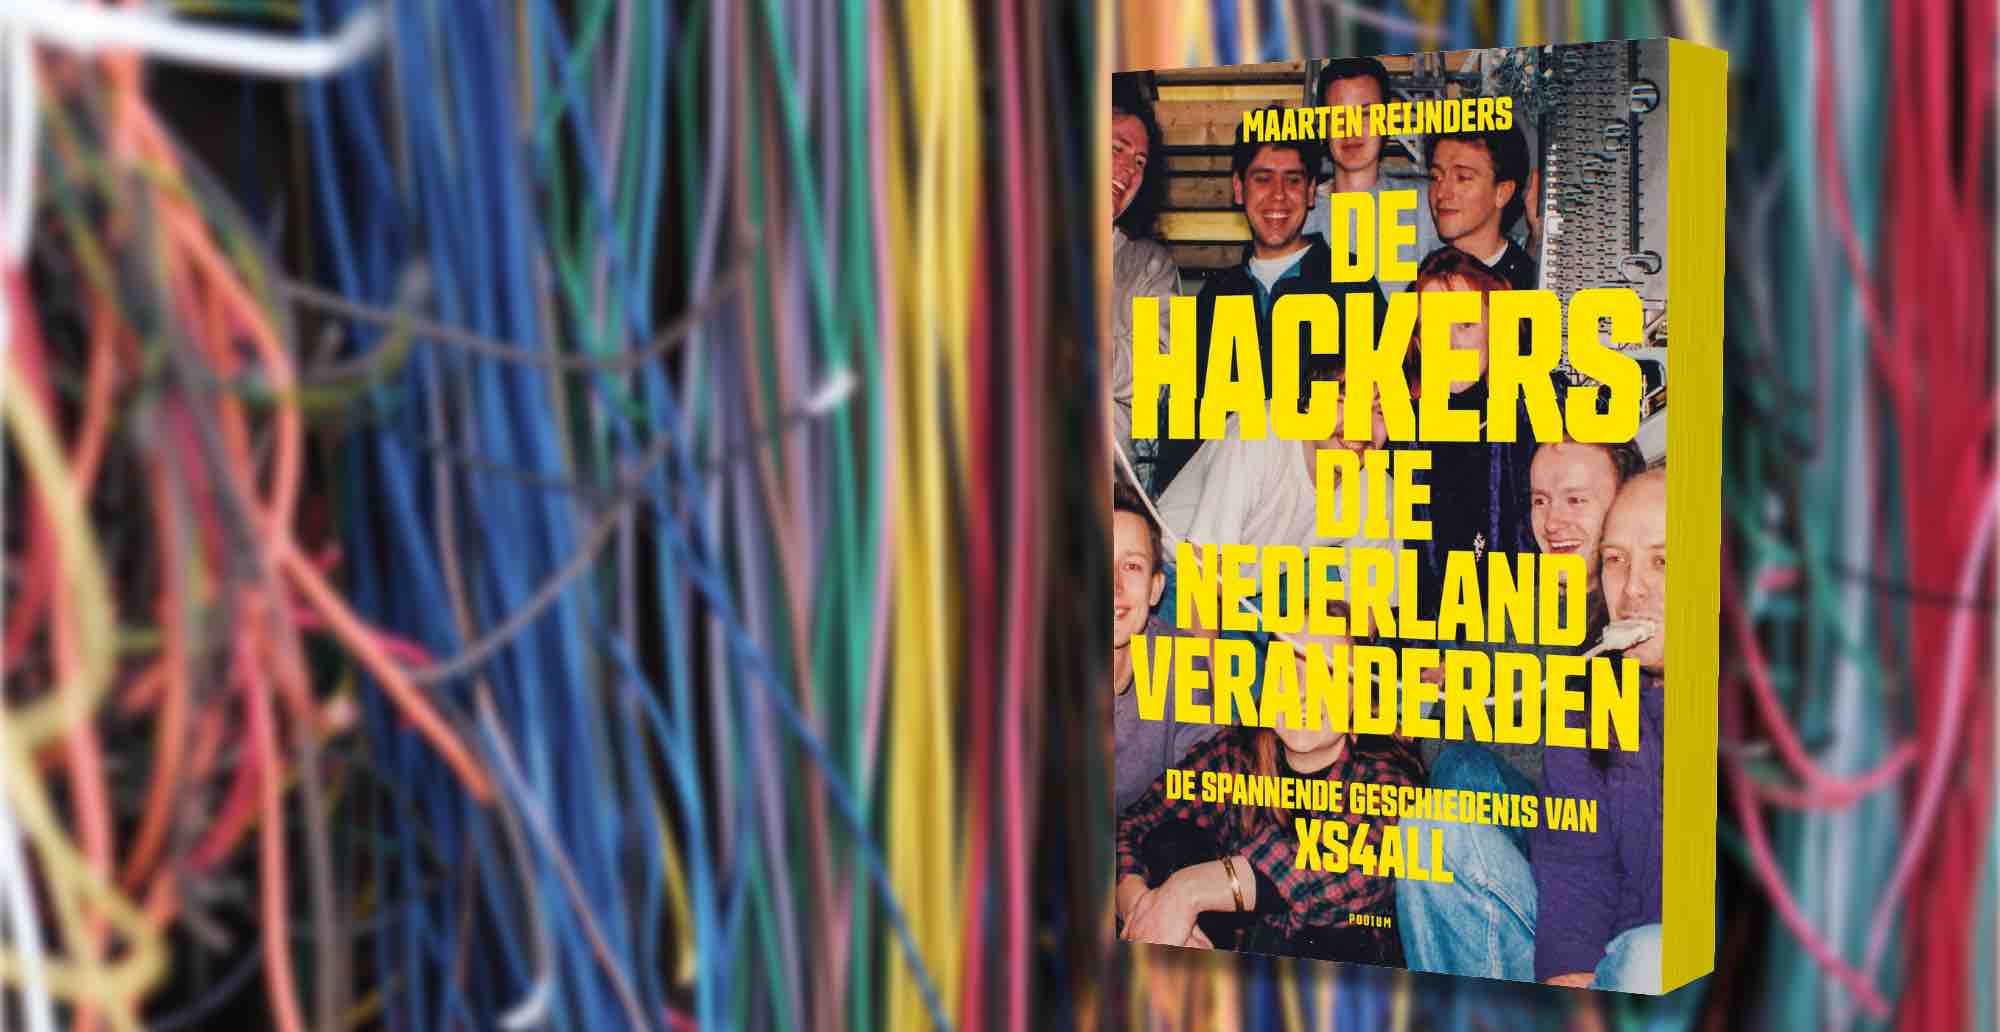 “We owe the Internet to hackers”